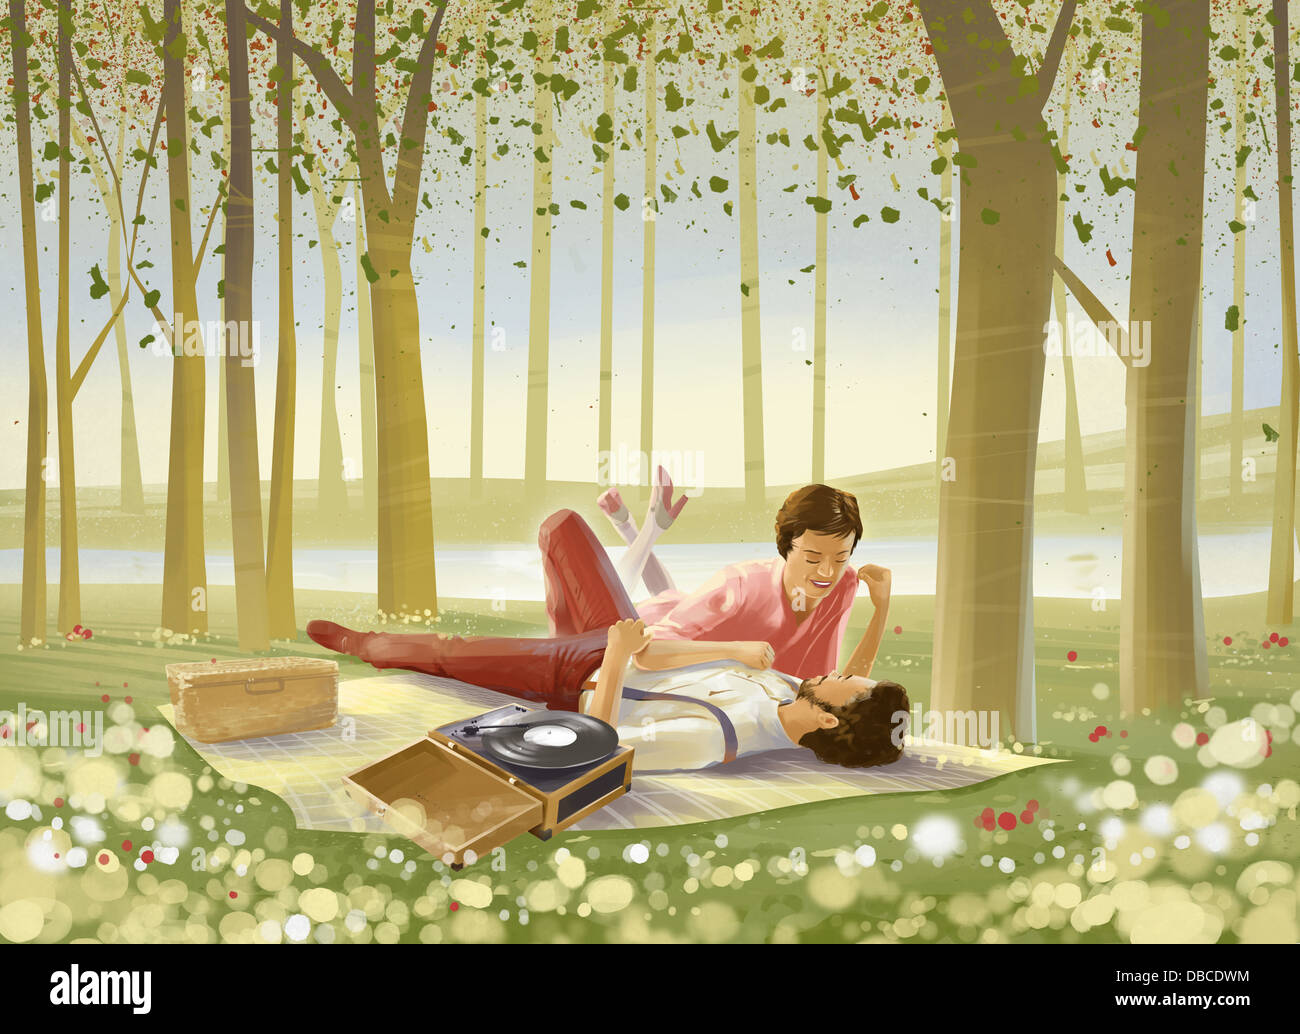 Illustration of romantic couple lying on picnic blanket in forest Stock Photo